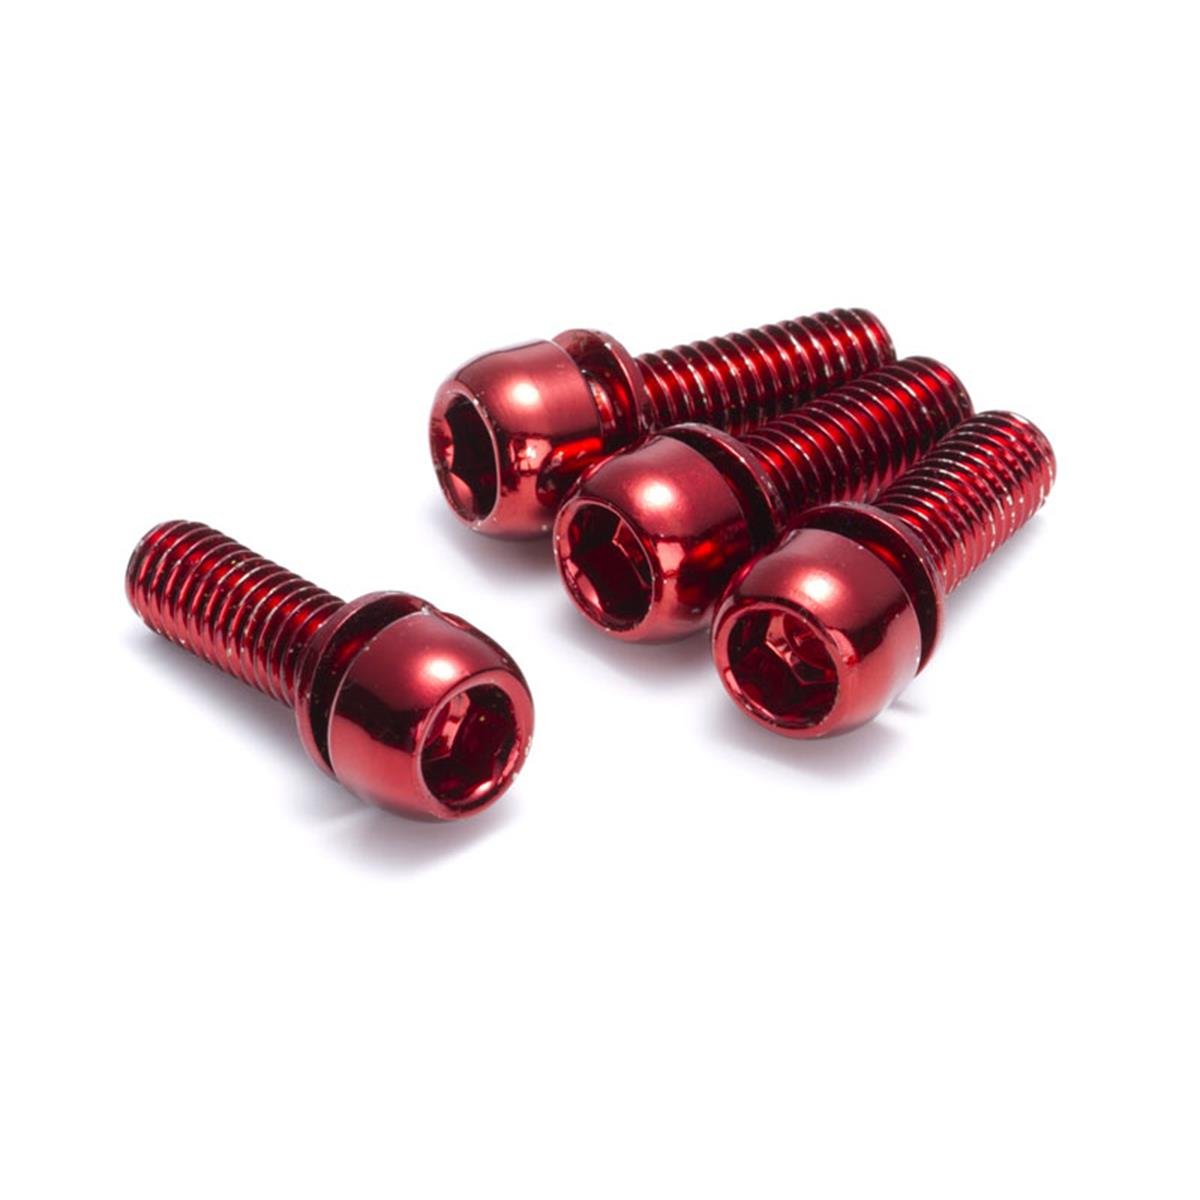 Reverse Components Brake Adapter Screws  M6x18mm, 4 Pack, Red